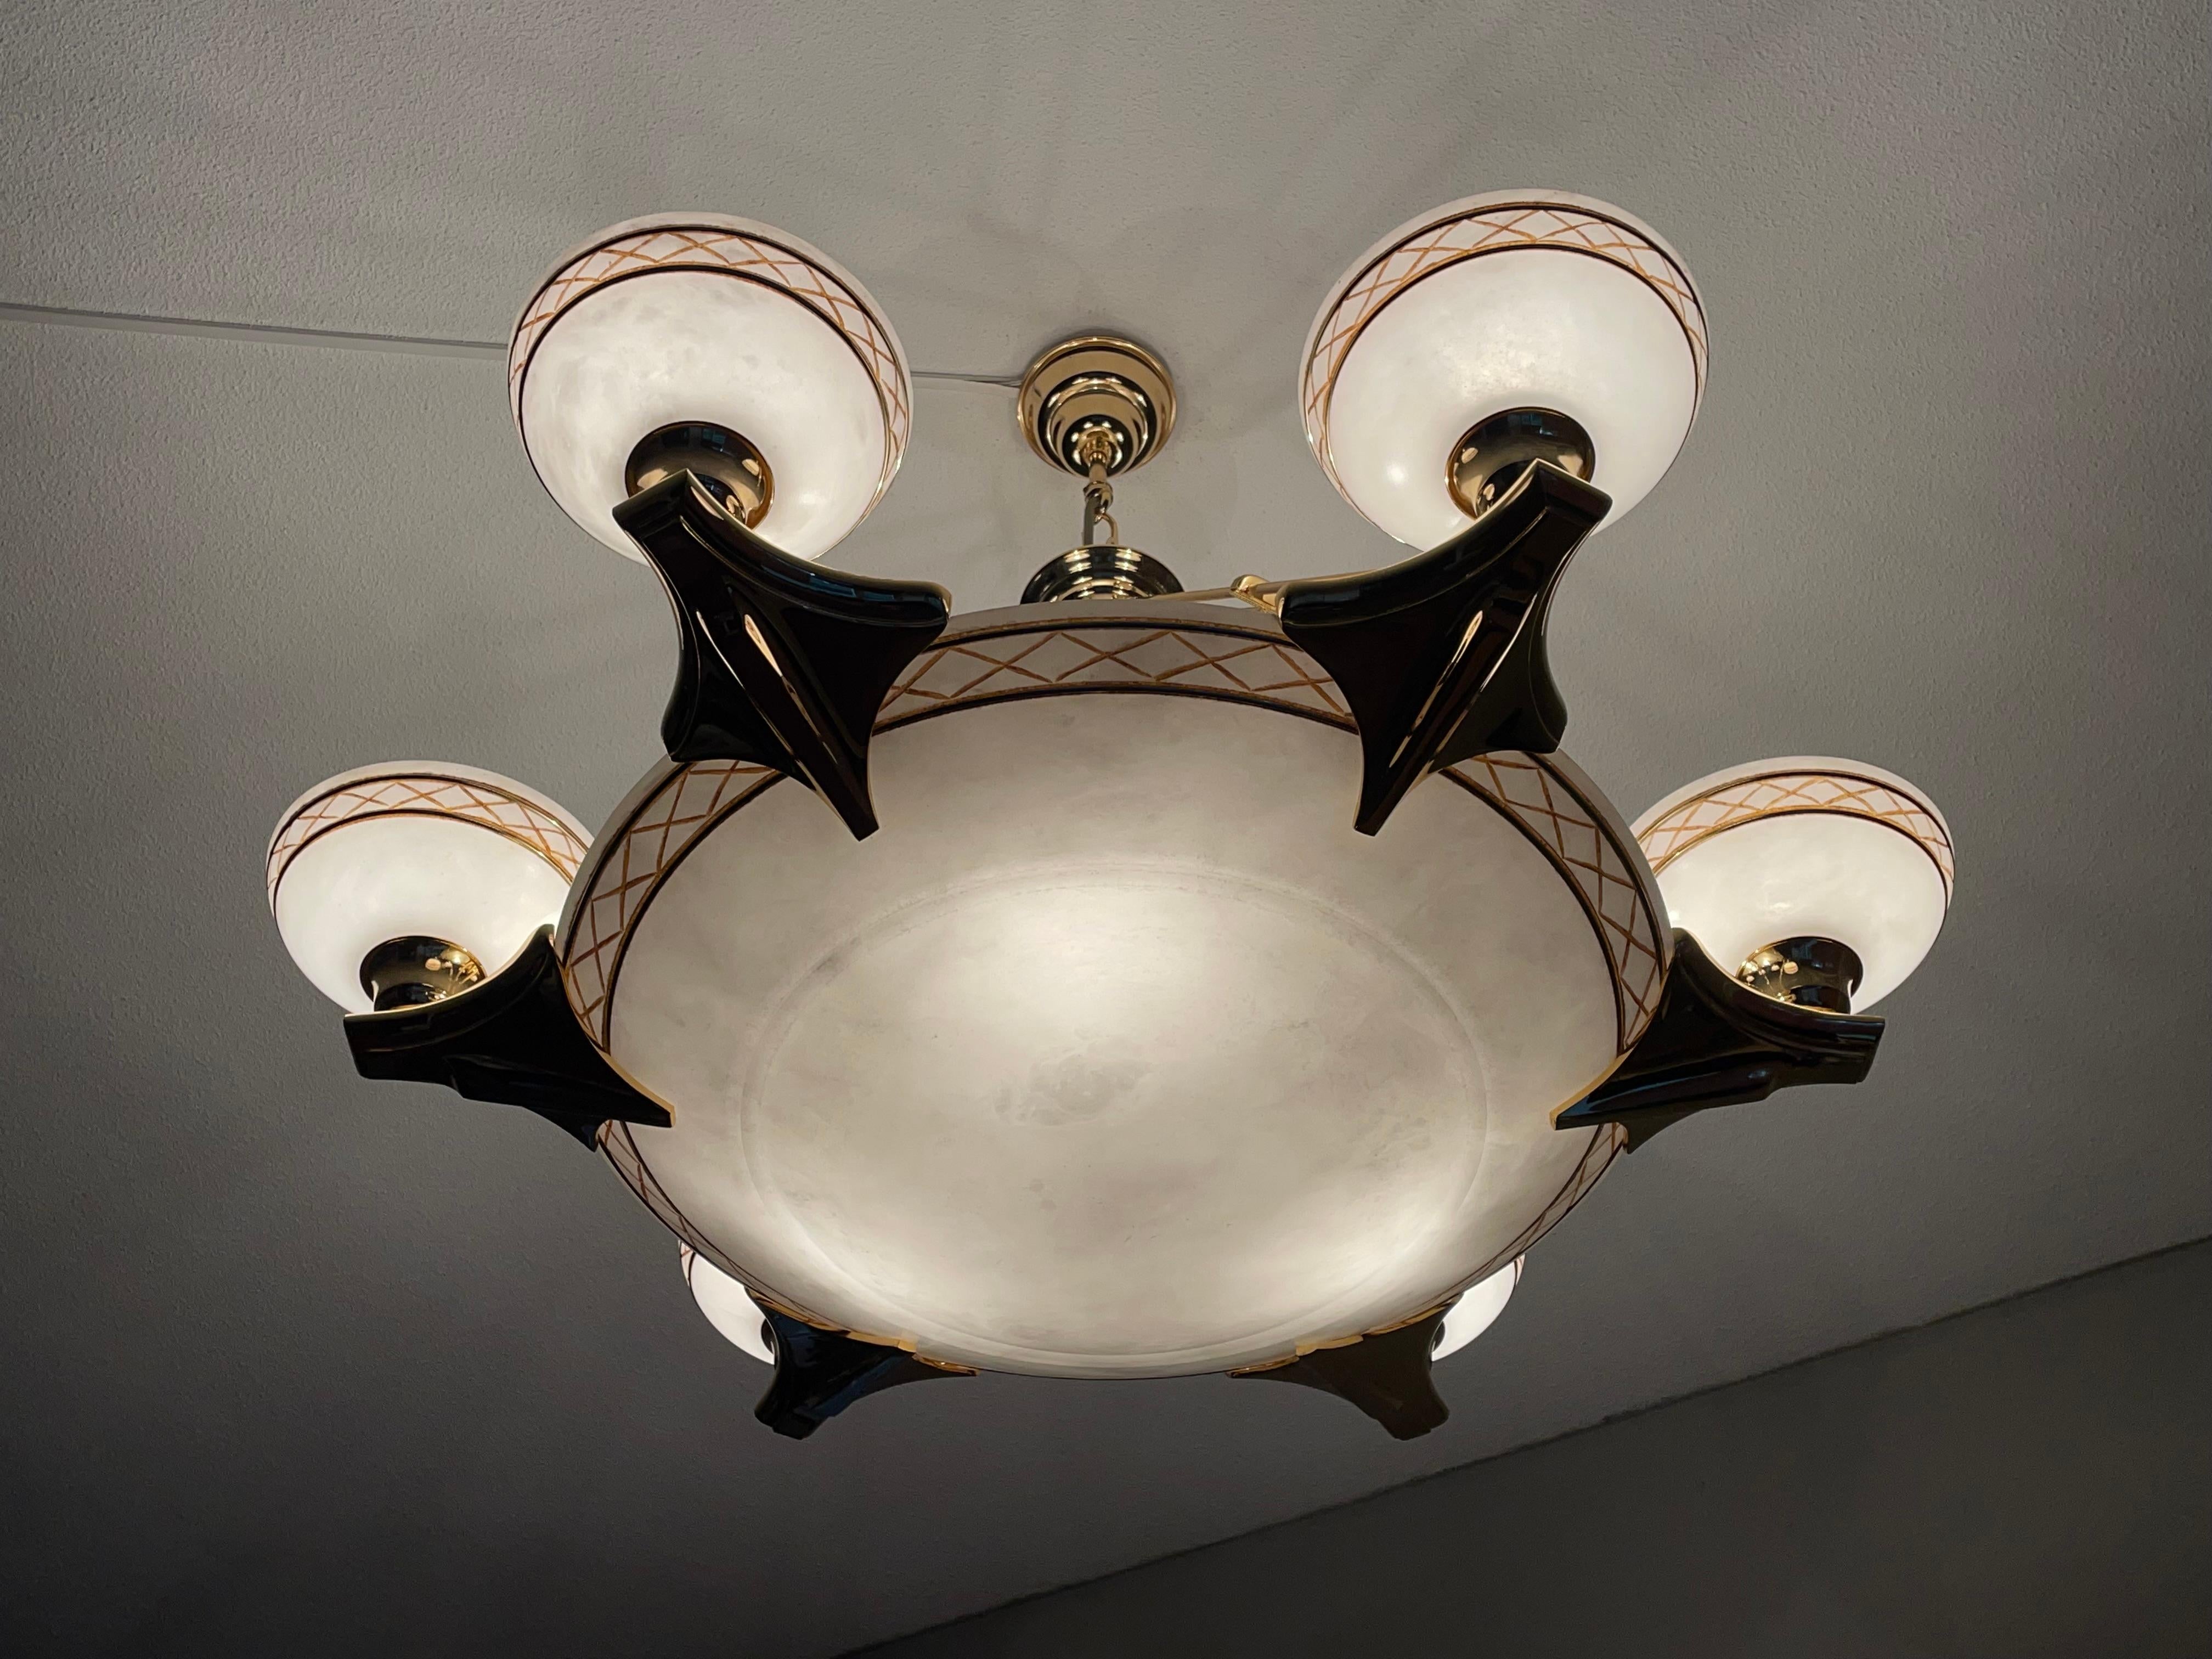 Extra large, excellent condition and great design, 6-arms and 9-light chandelier.

If you like Art Deco style light fixtures with a touch of Hollywood Regency, then this large and rich 1970s alabaster and bronze chandelier could be perfect for